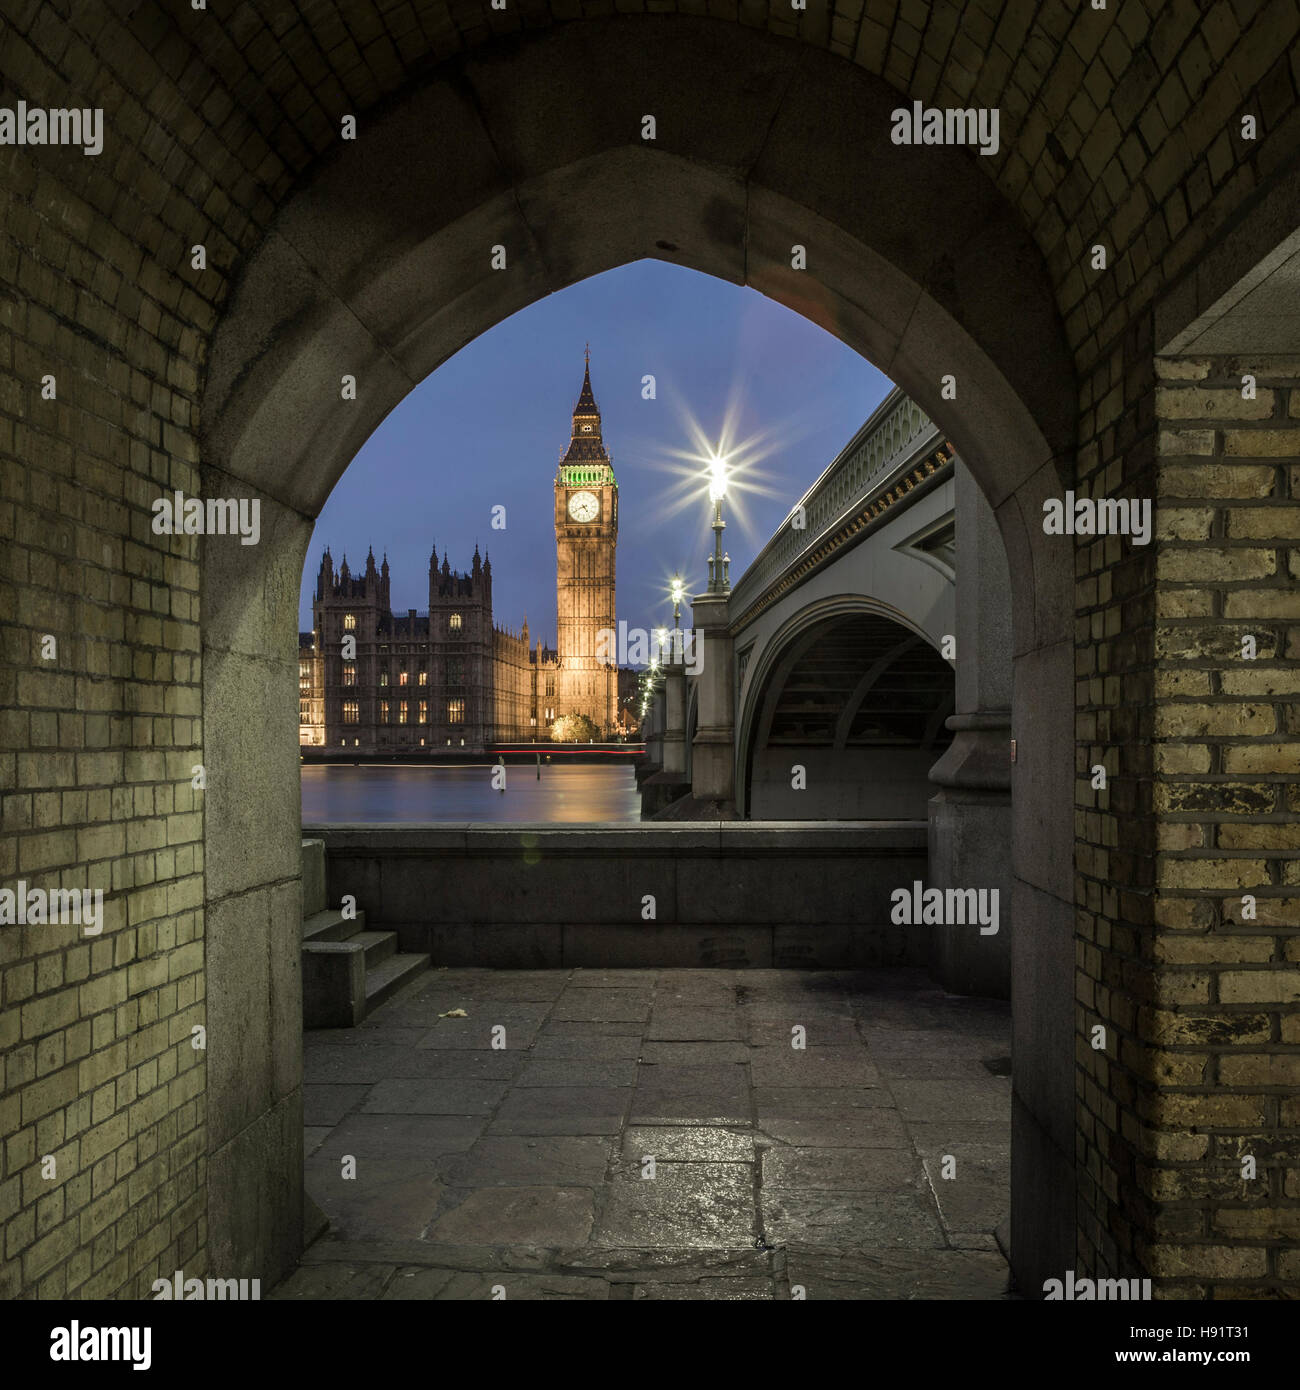 A view of Big Ben at night from across the River Thames from the riverside walkway opposite Elizabeth Tower. Stock Photo